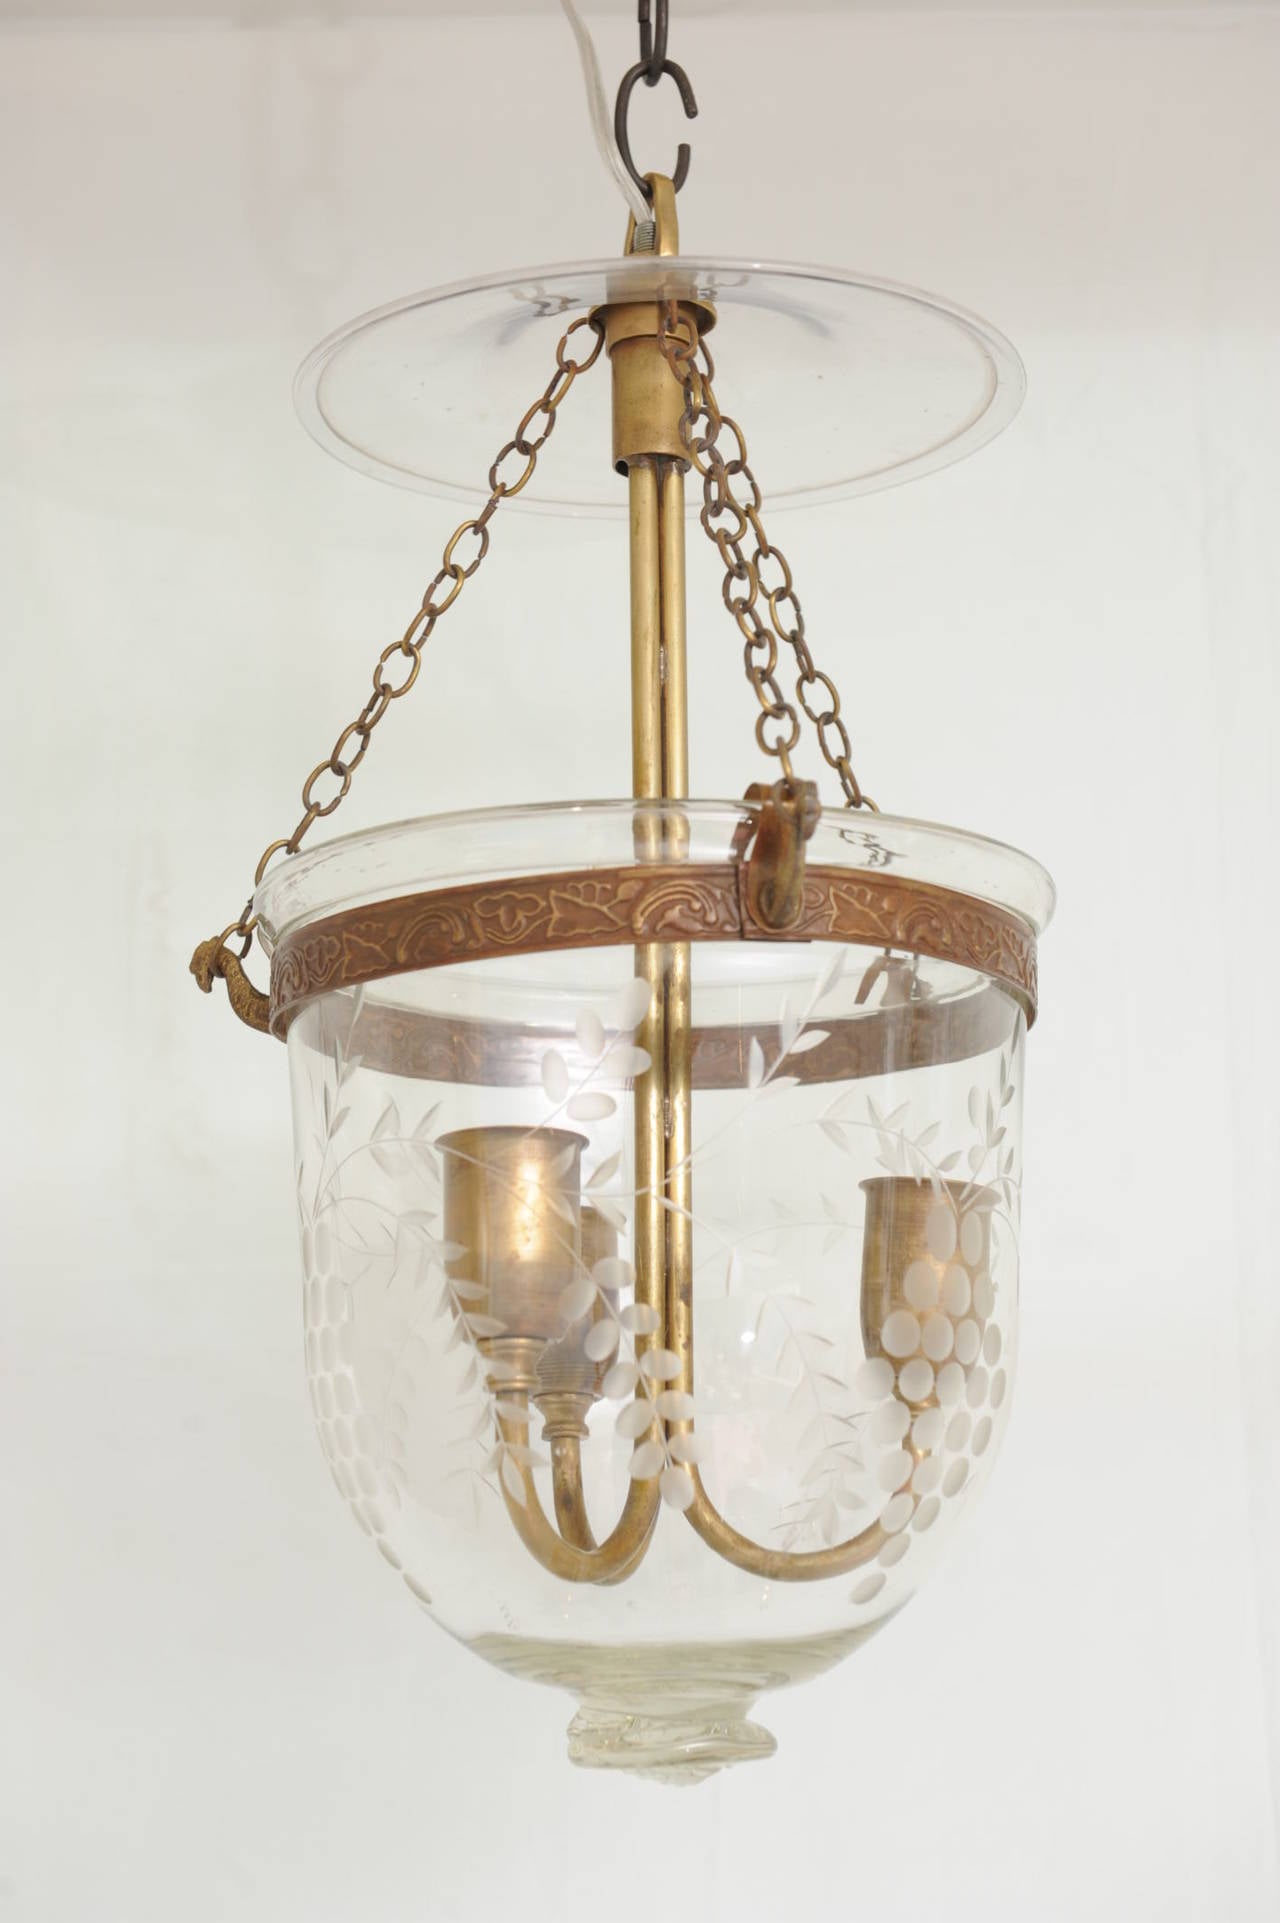 Pair of hand-blown, early 20th C. bell jar hall lanterns.  This pair has classic grape vine etching, glass pontil, original brass hardware, smoke cap and electrified for modern use with three candelabra bulbs.  Elegant and classic lighting.  English.